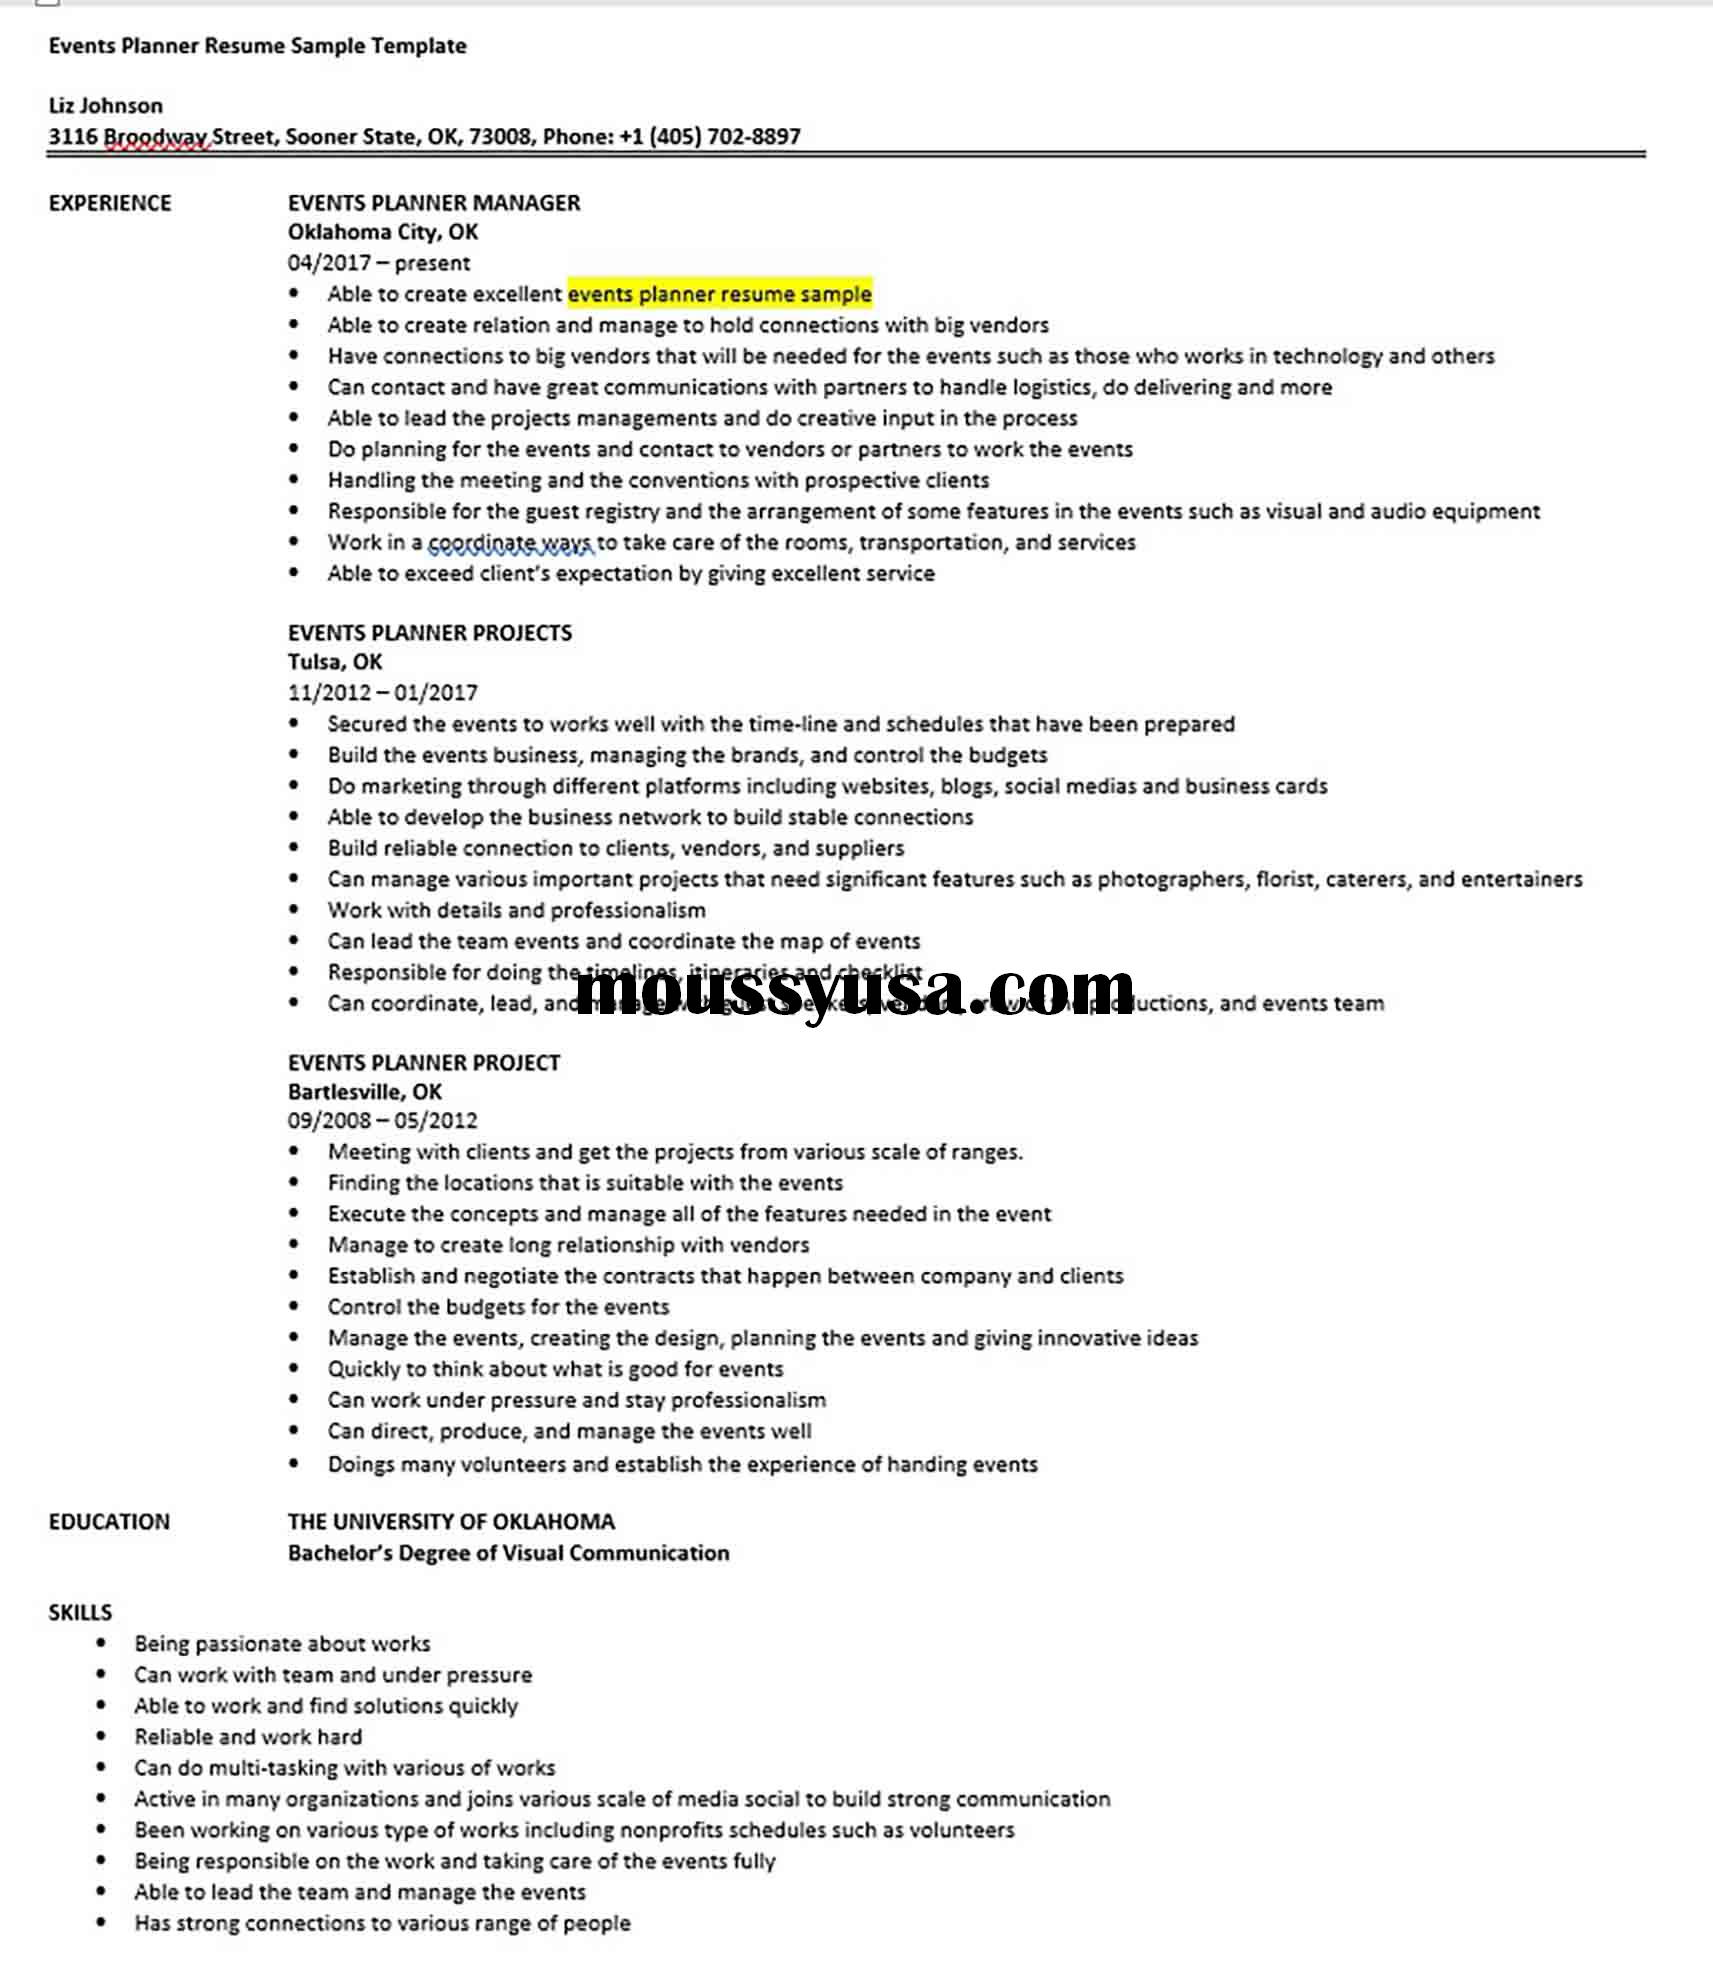 Events Planner Resume Sample Template 1